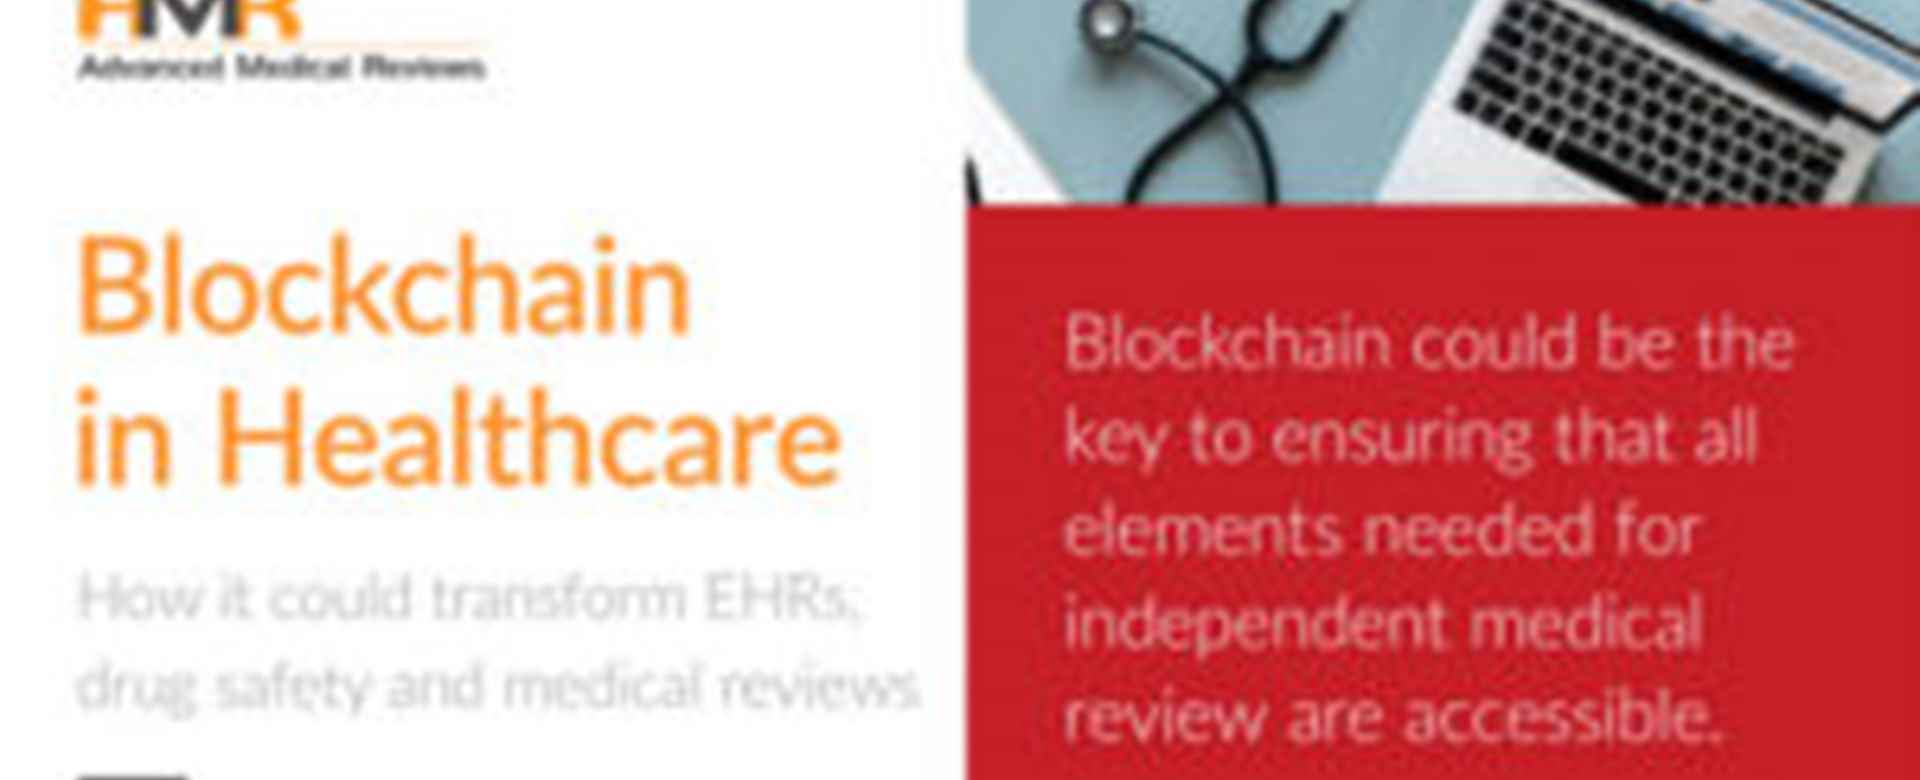 Blockchain in Healthcare: How it could transform EHRs, drug safety and medical reviews